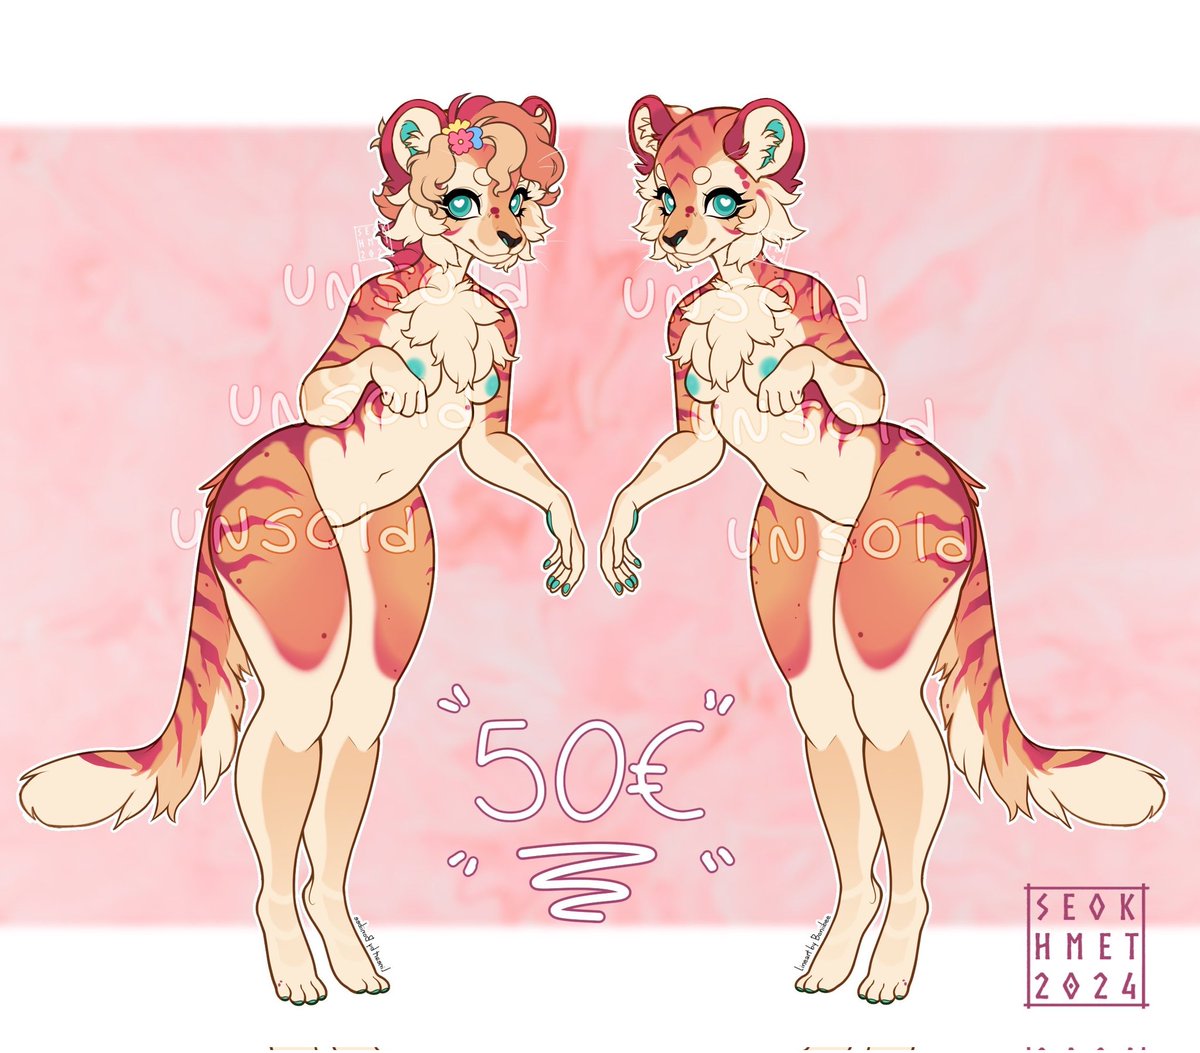 Next on the furry adopt series: Strawberry Tiger
( base by @Boniibee)